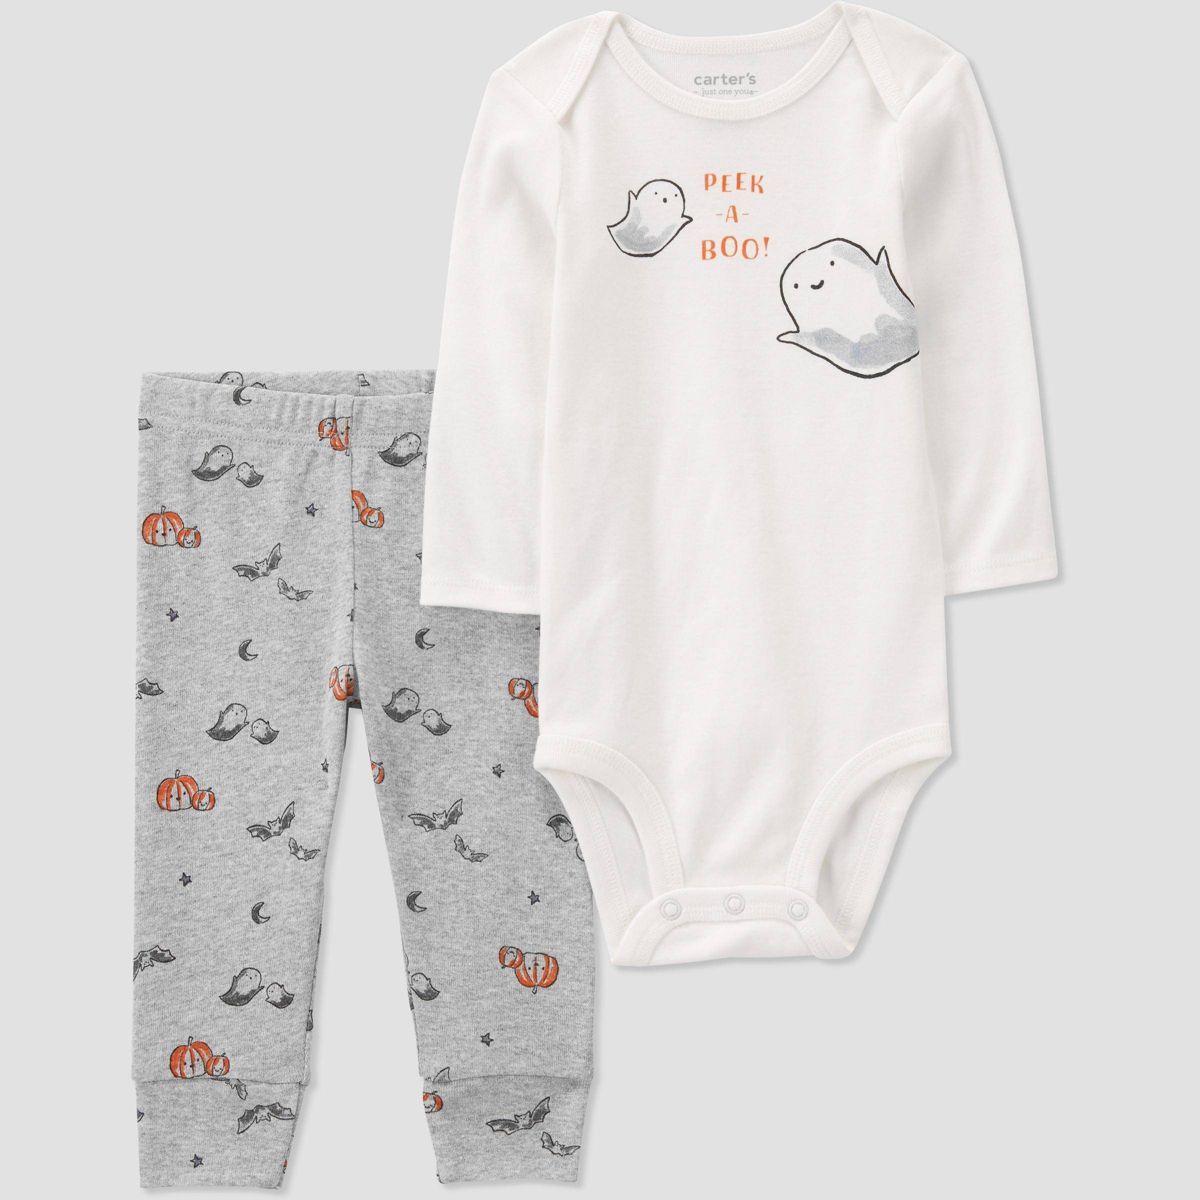 Carter's Just One You® Baby 'Peek-a-Boo' Halloween Top and Bottom Set - Gray/White Newborn | Target